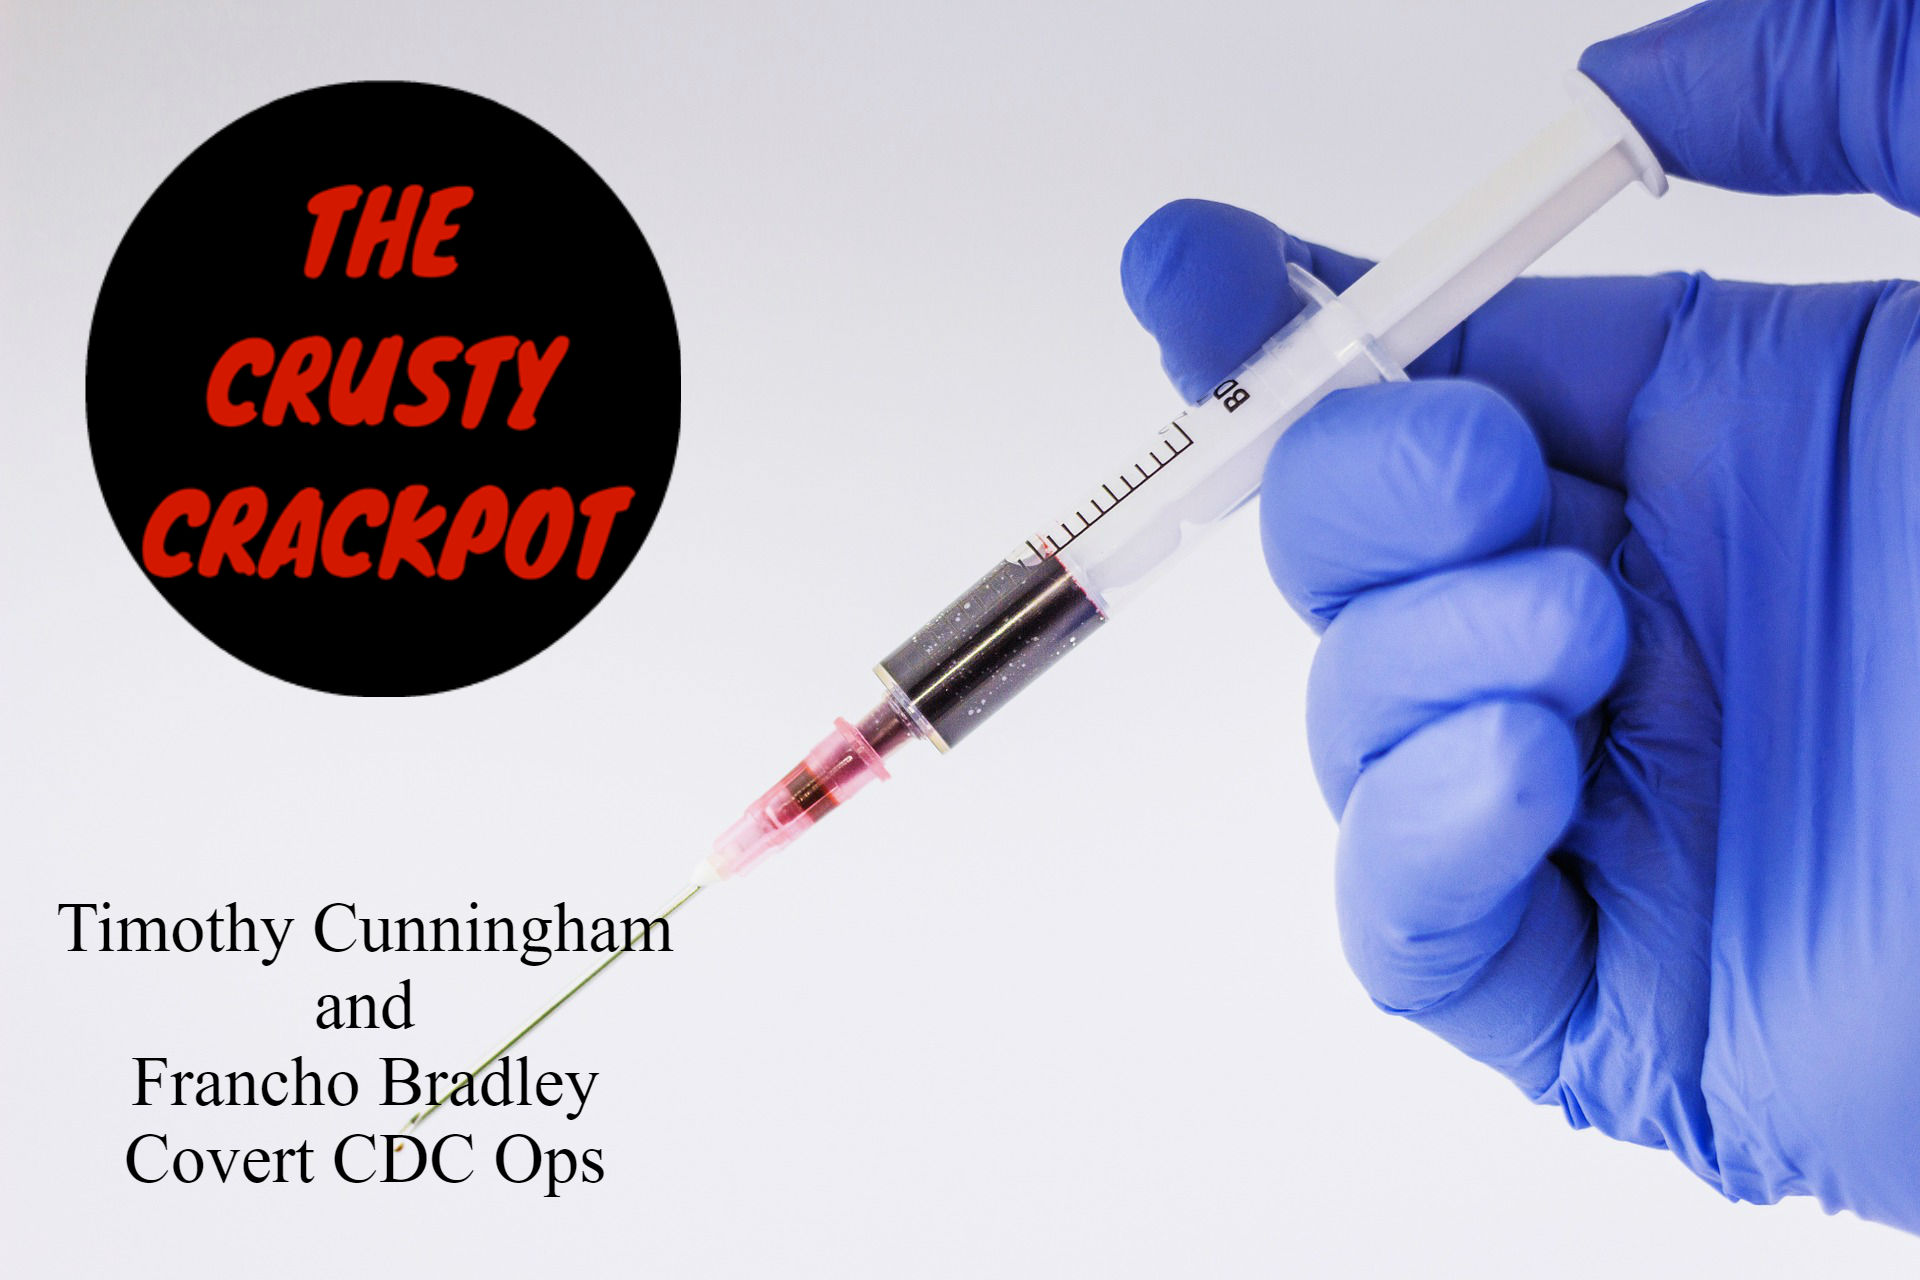 Episode 16 – Timothy Cunningham and Francho Bradley – CDC Covert Ops